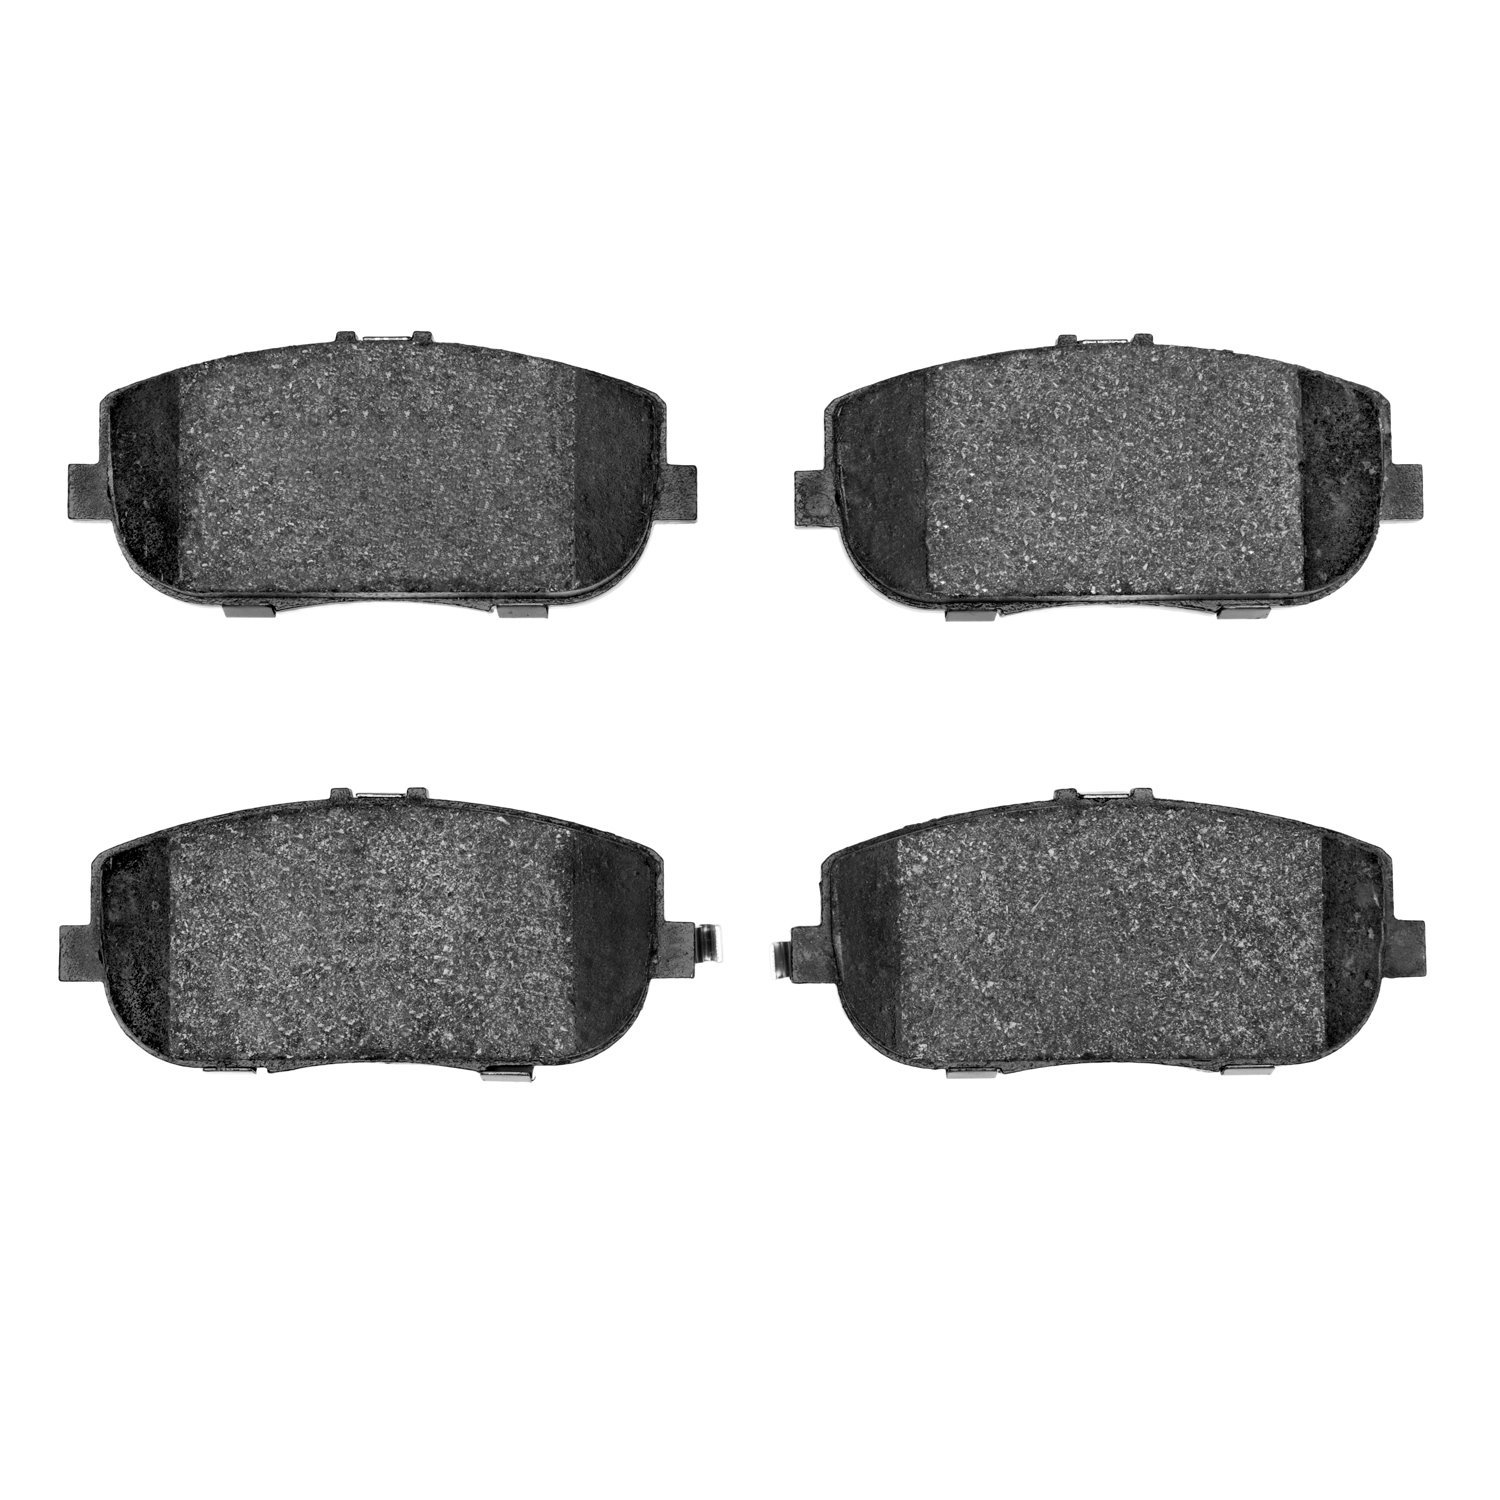 1115-1180-00 Active Performance Low-Metallic Brake Pads, Fits Select Multiple Makes/Models, Position: Rear